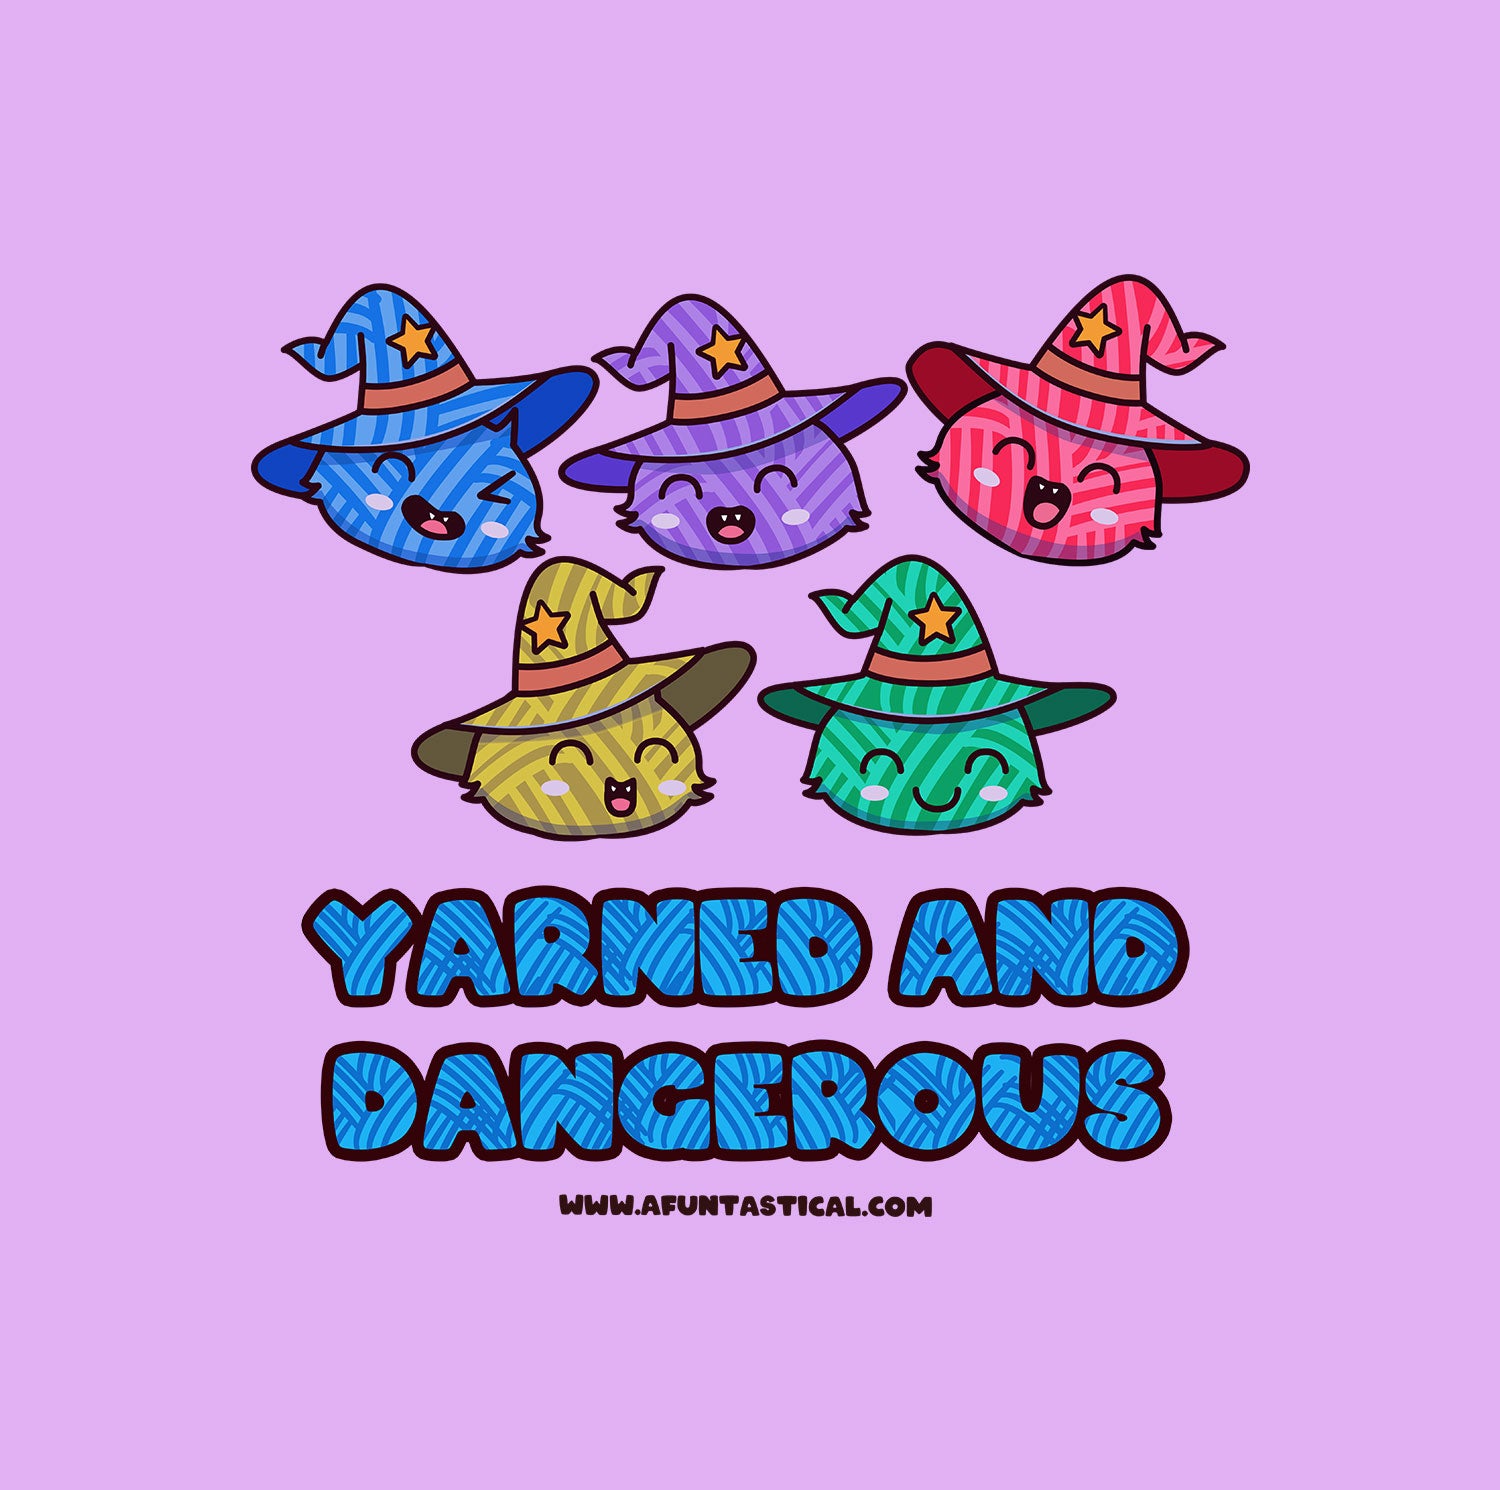 Fluffy's Yarned and Dangerous Softstyle Tee